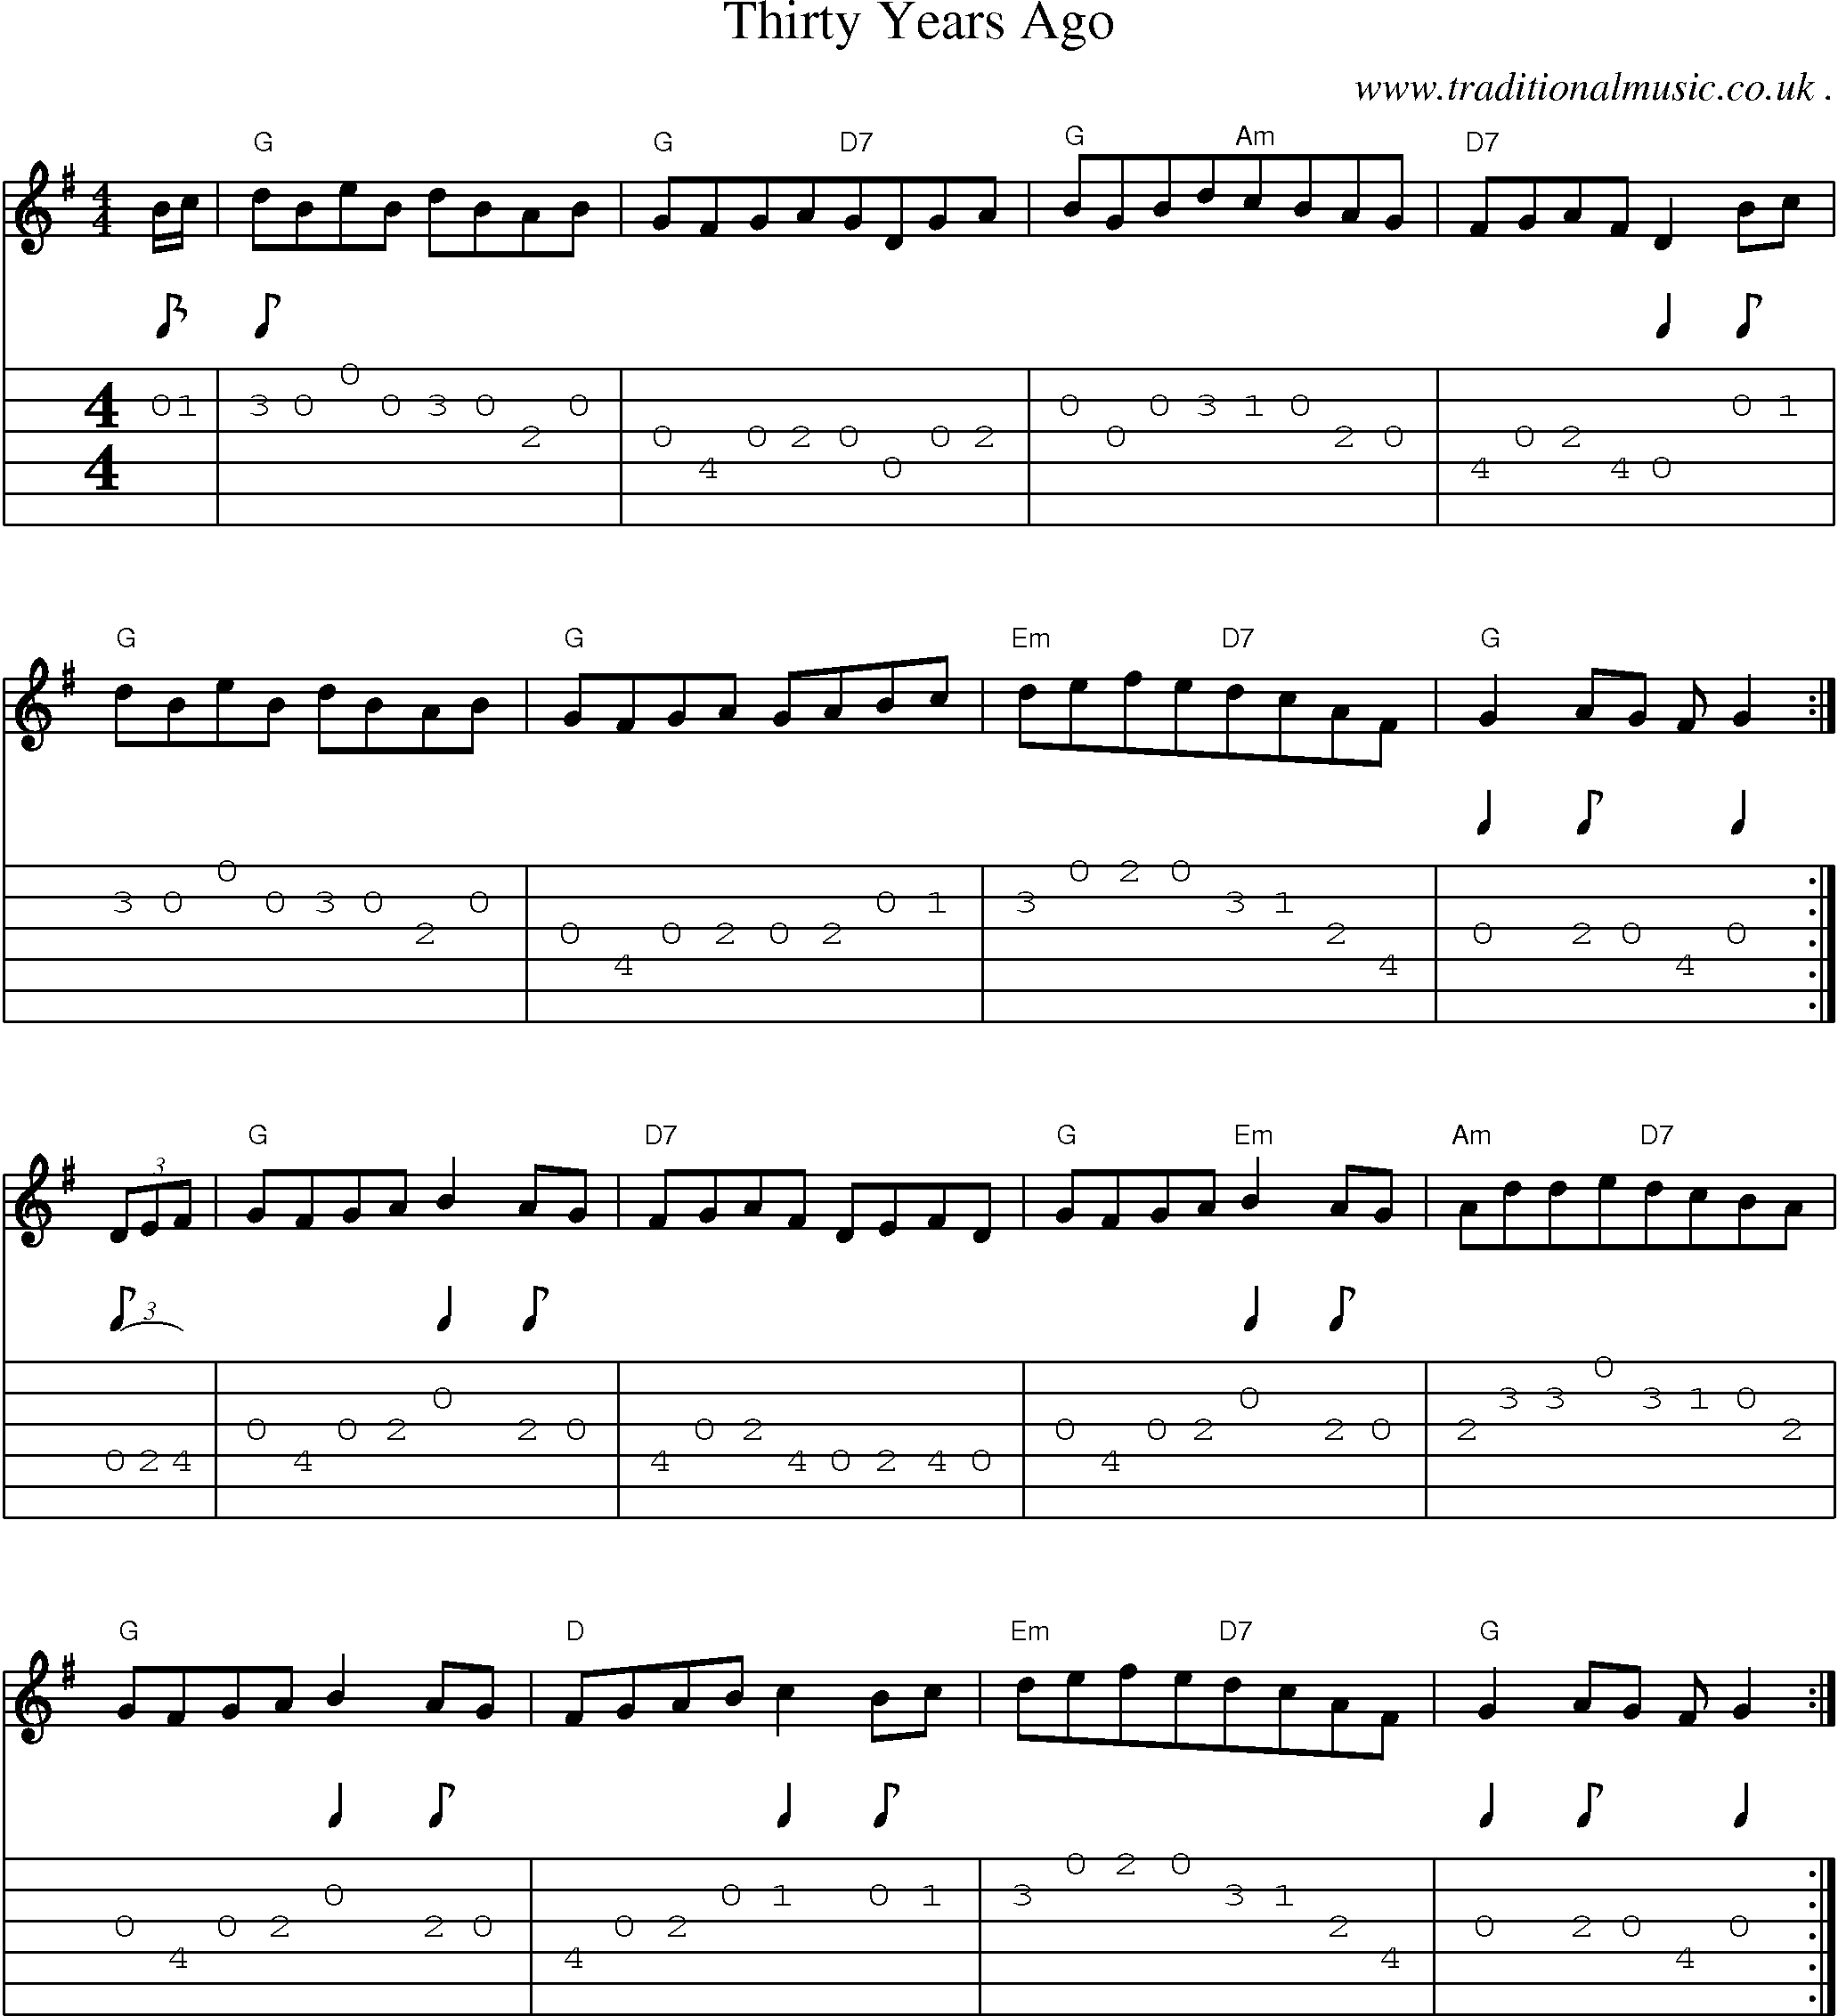 Sheet-Music and Guitar Tabs for Thirty Years Ago